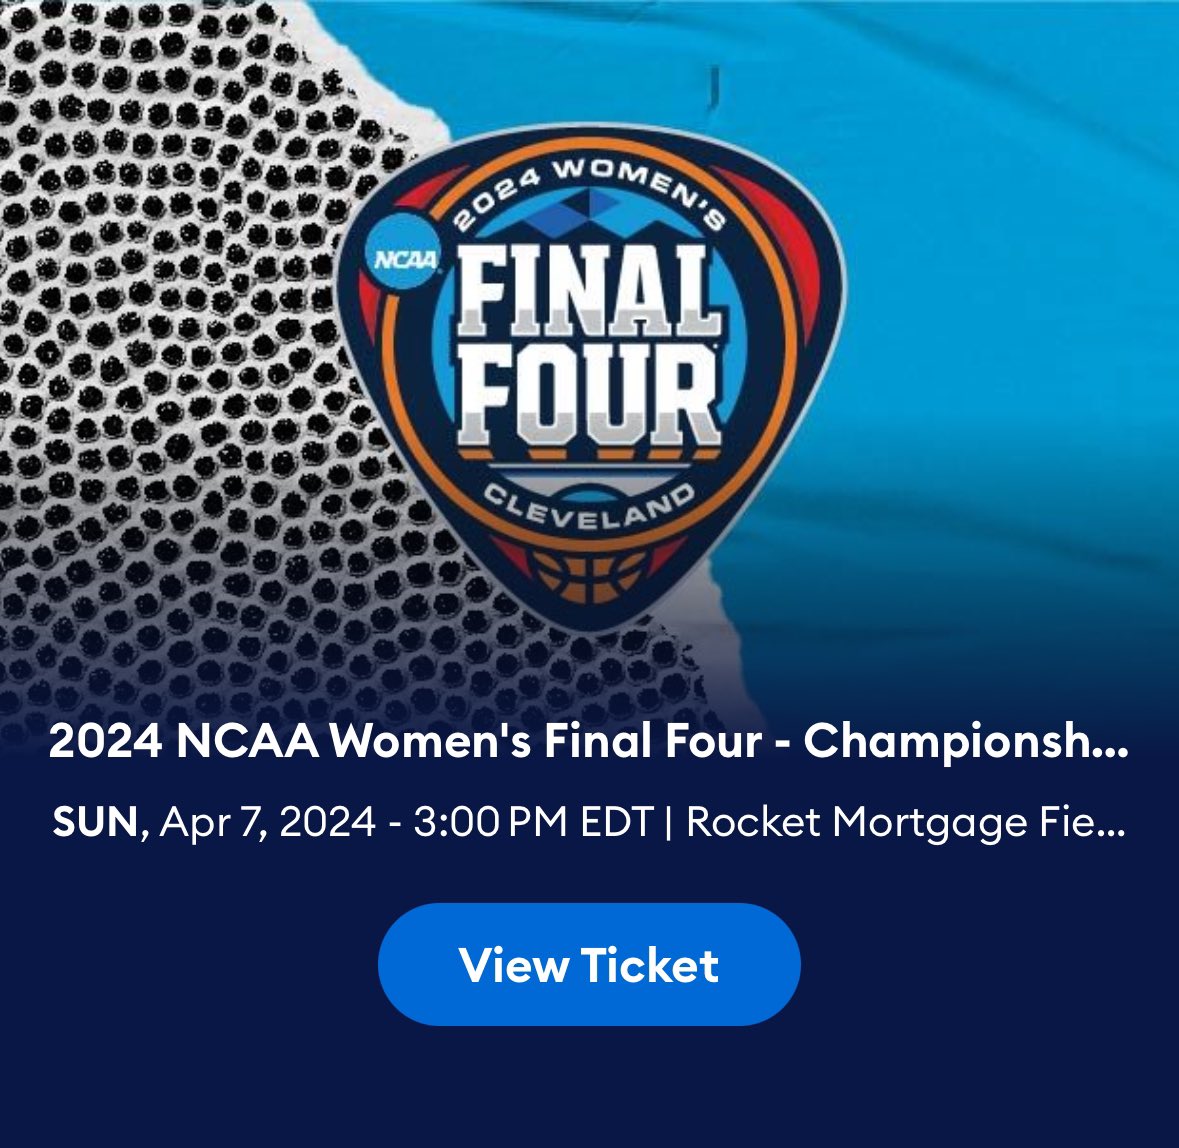 SOLD‼️‼️Anyone looking for Womens NCAA final four tickets I have four on sale through AXS $250/ticket at this time. Section M101 Row 11 Seats 15-18. #MarchMadness2024 #MarchMadnessWBB